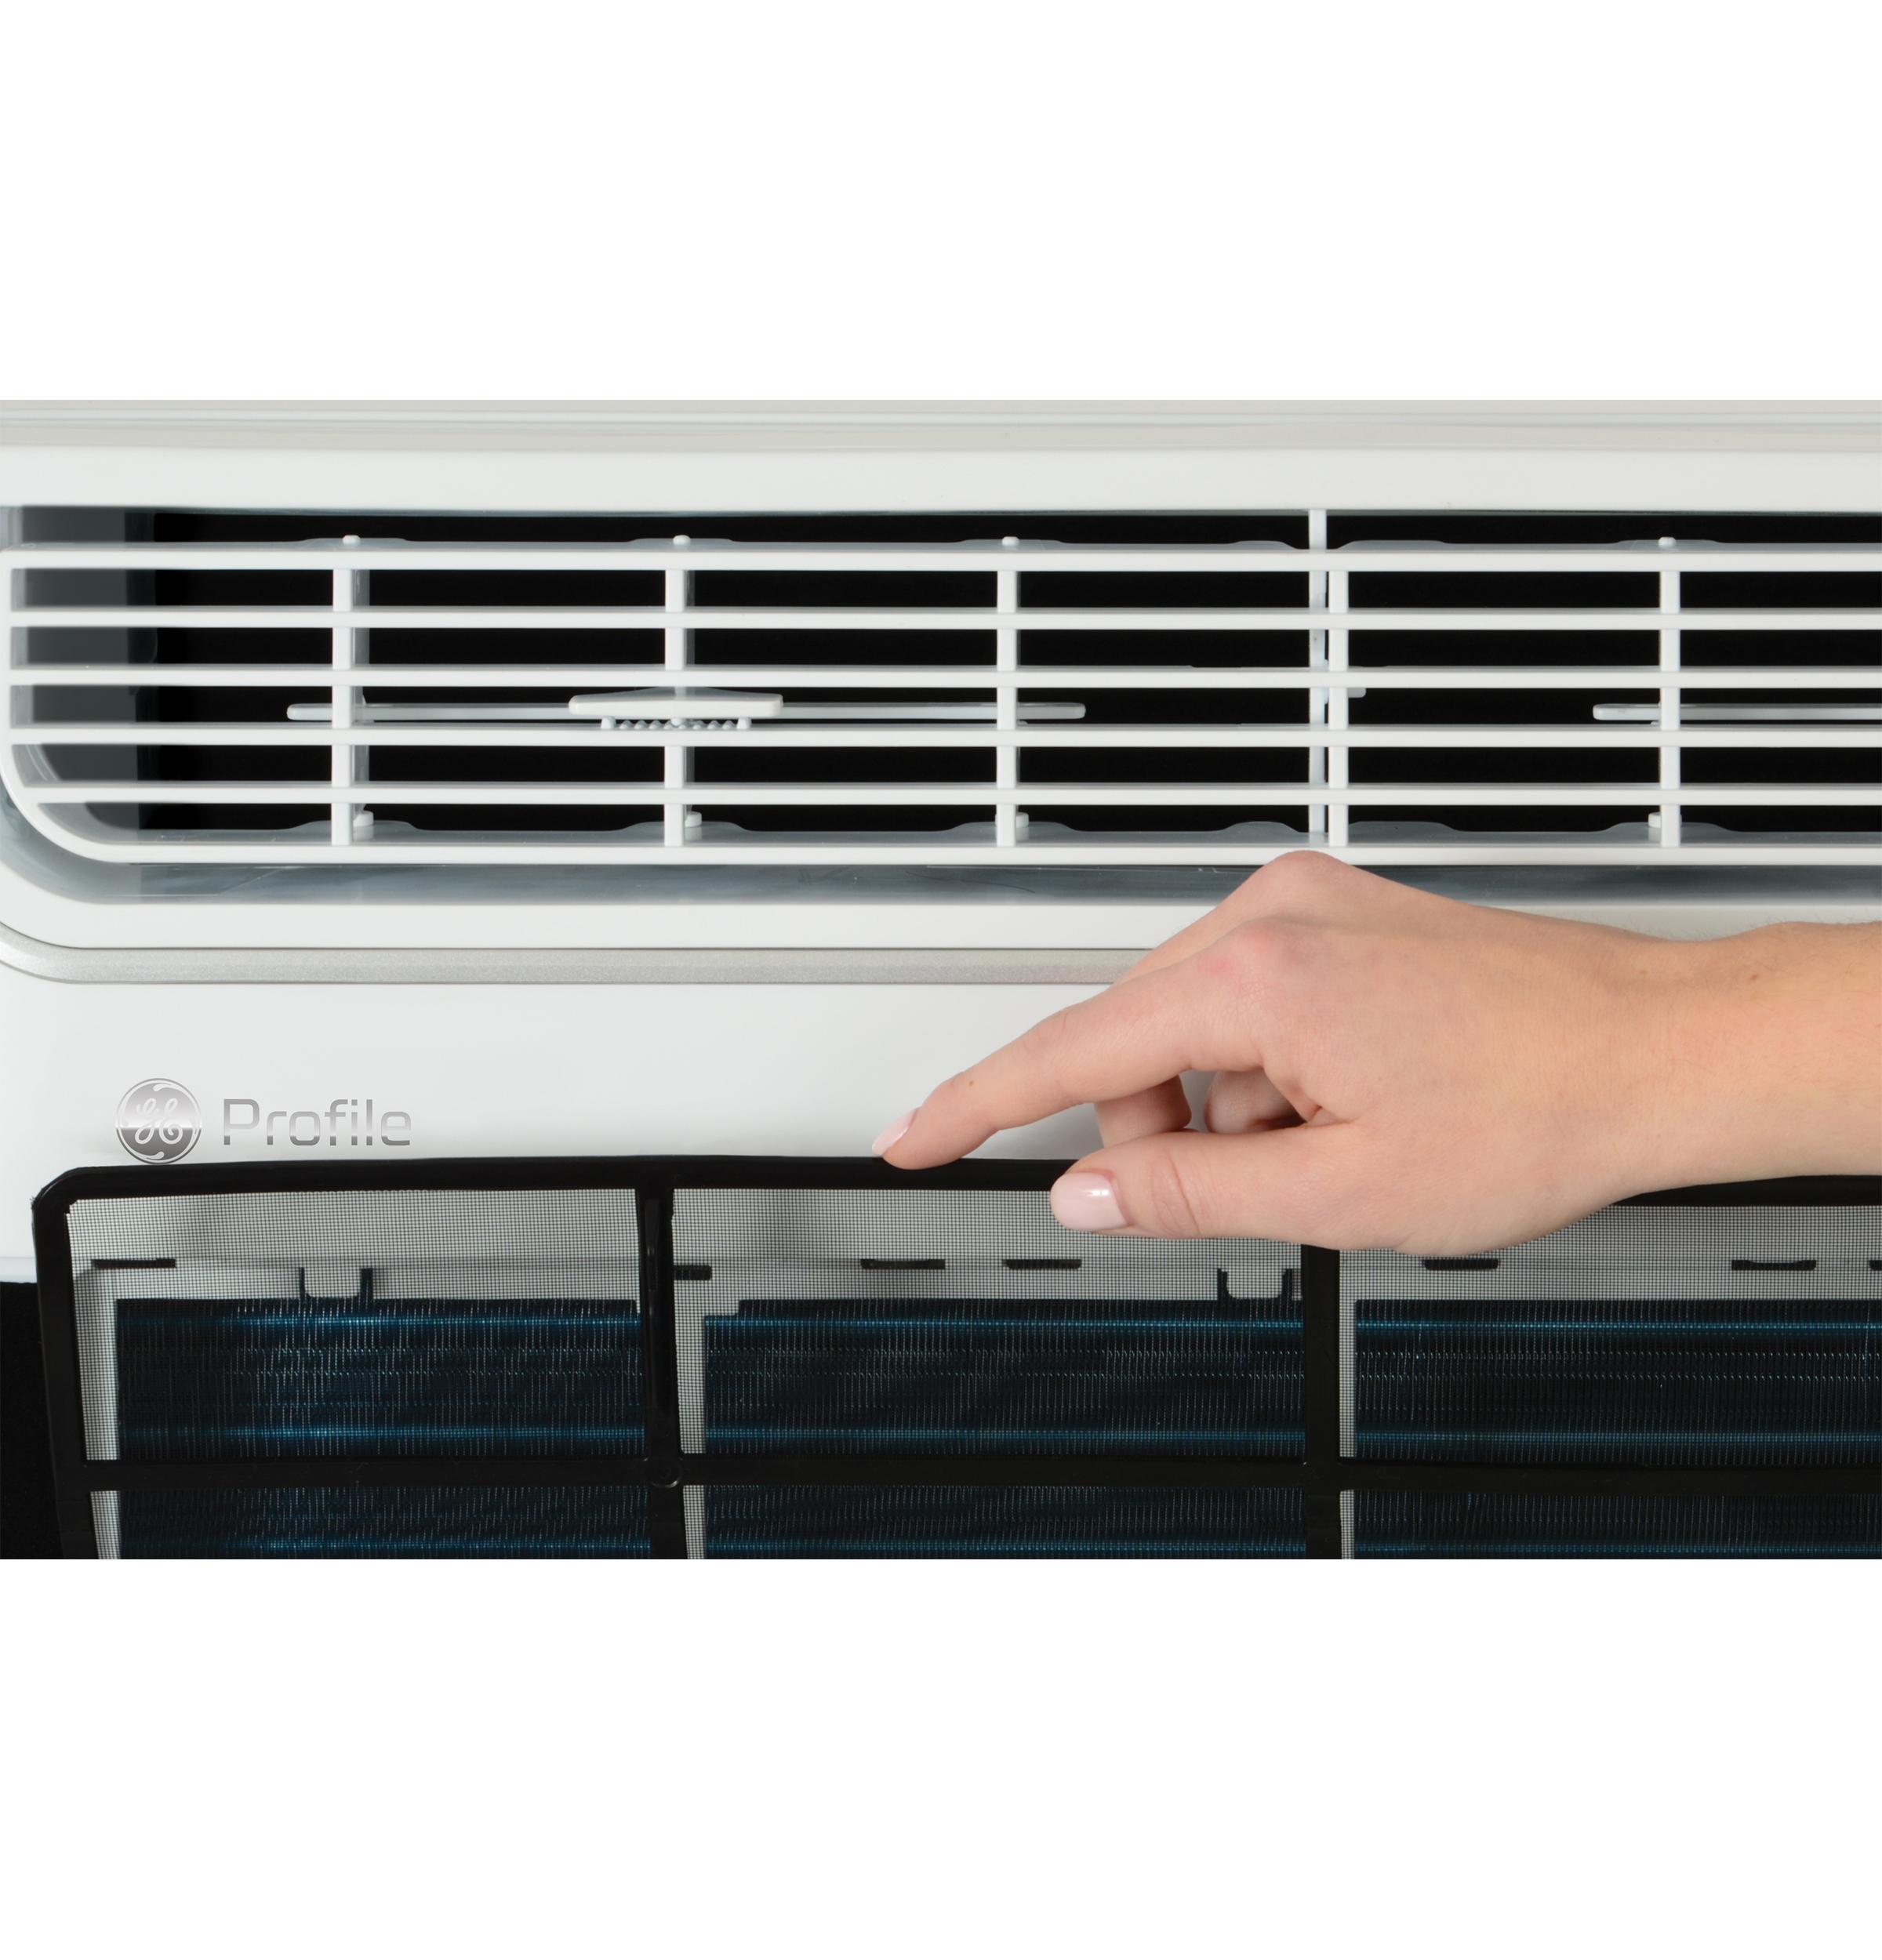 Ge Appliances AHTR14AC Ge Profile™ 13,500 Btu Inverter Smart Ultra Quiet Window Air Conditioner For Large Rooms Up To 700 Sq. Ft., Energy Star®